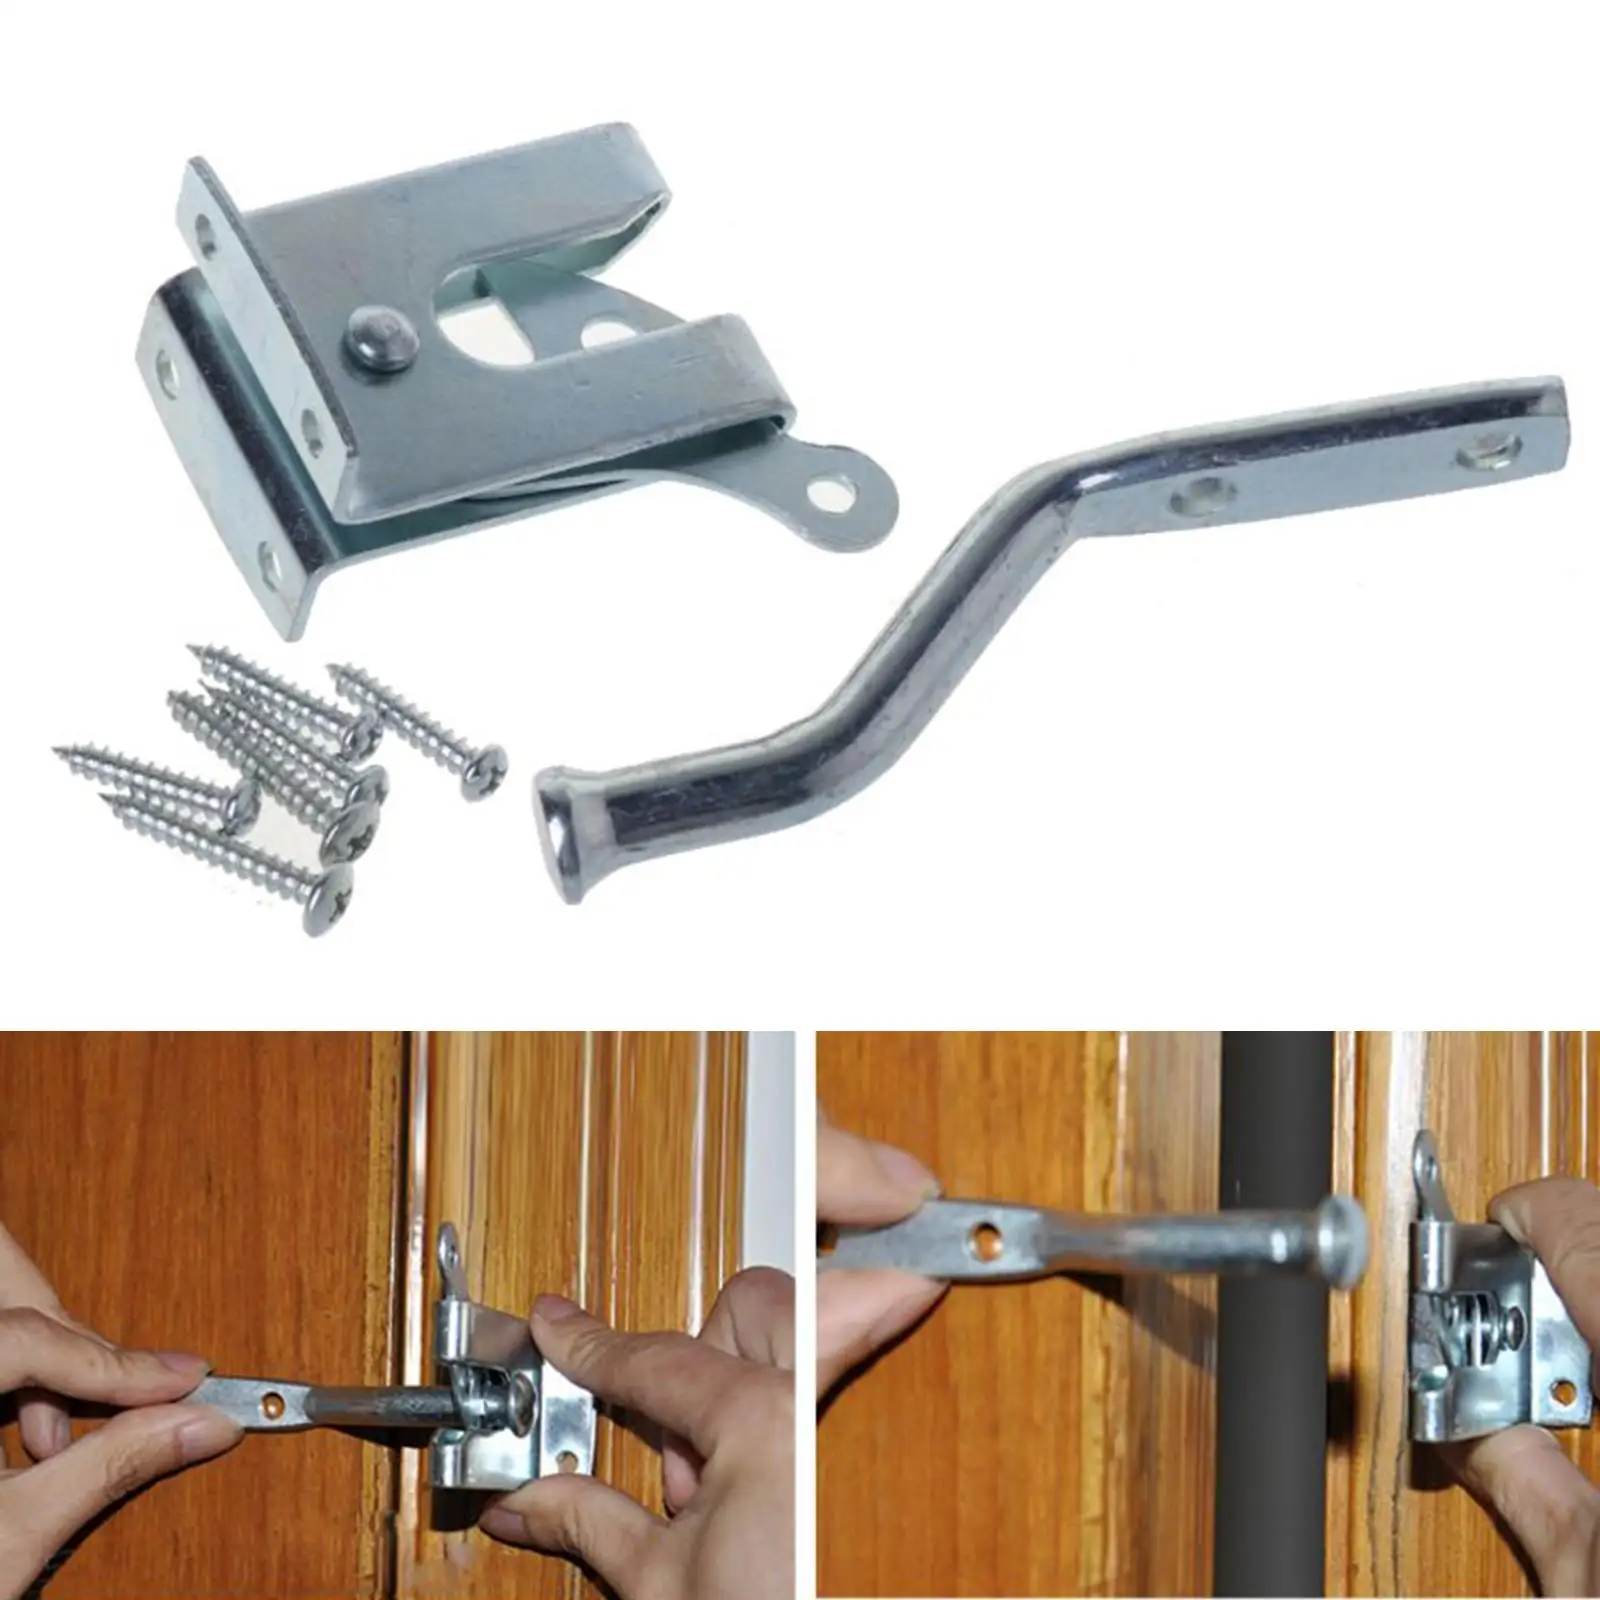 Self Locking Gte Ltch Door ltches Grvity Lever Gte Ctch Hrdwre utomtic for Furniture Vinyl/Wood Fence Pool Bby Gtes